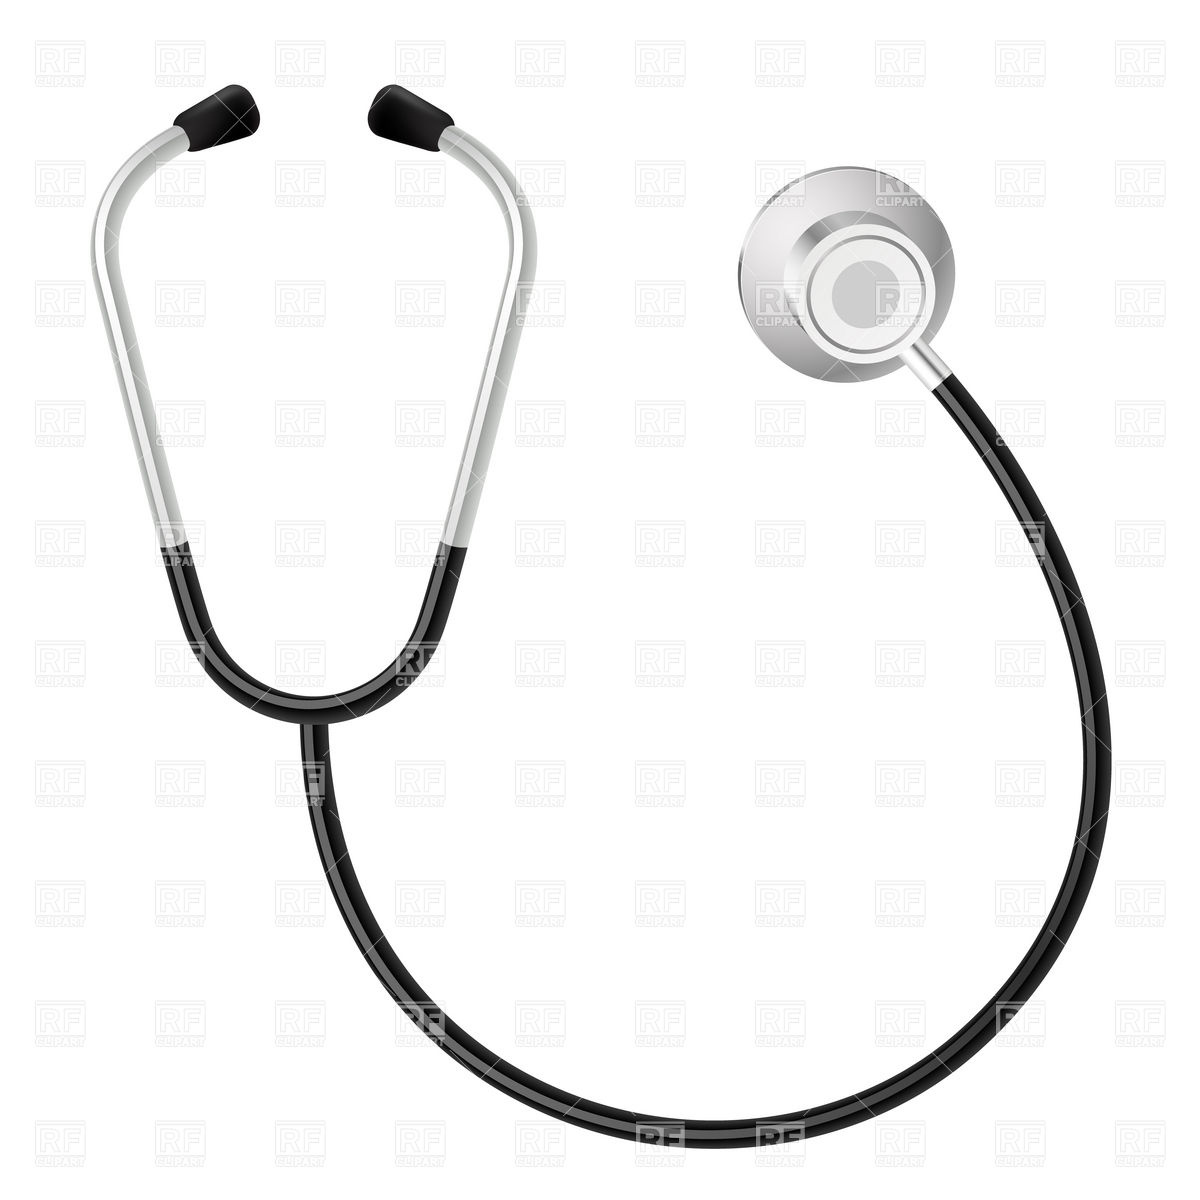 Medical Stethoscope Healthcare Medical Download Royalty Free Vector